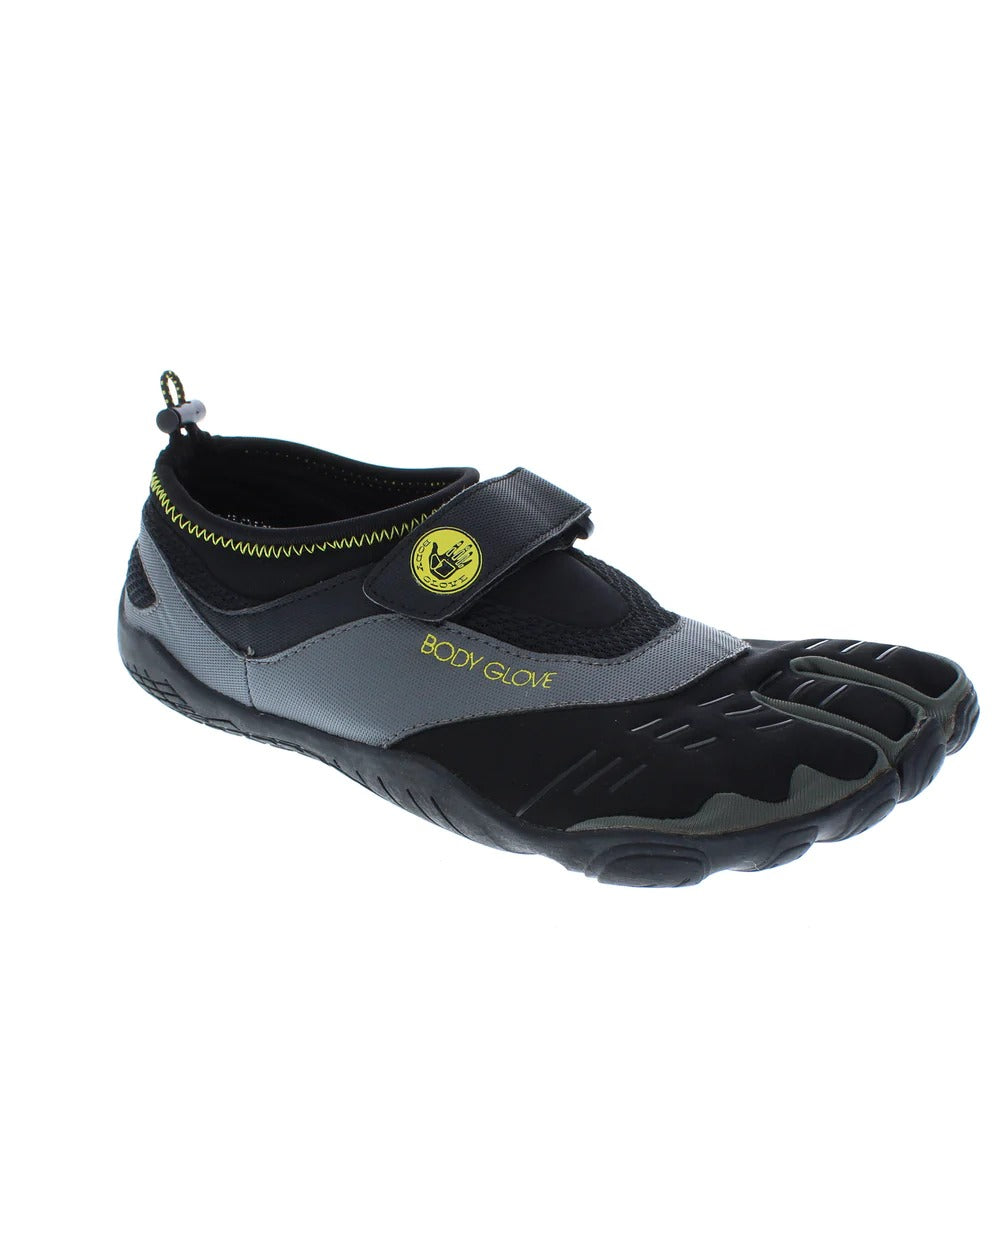 MEN'S 3T BAREFOOT MAX WATER SHOES - BLACK/YELLOW